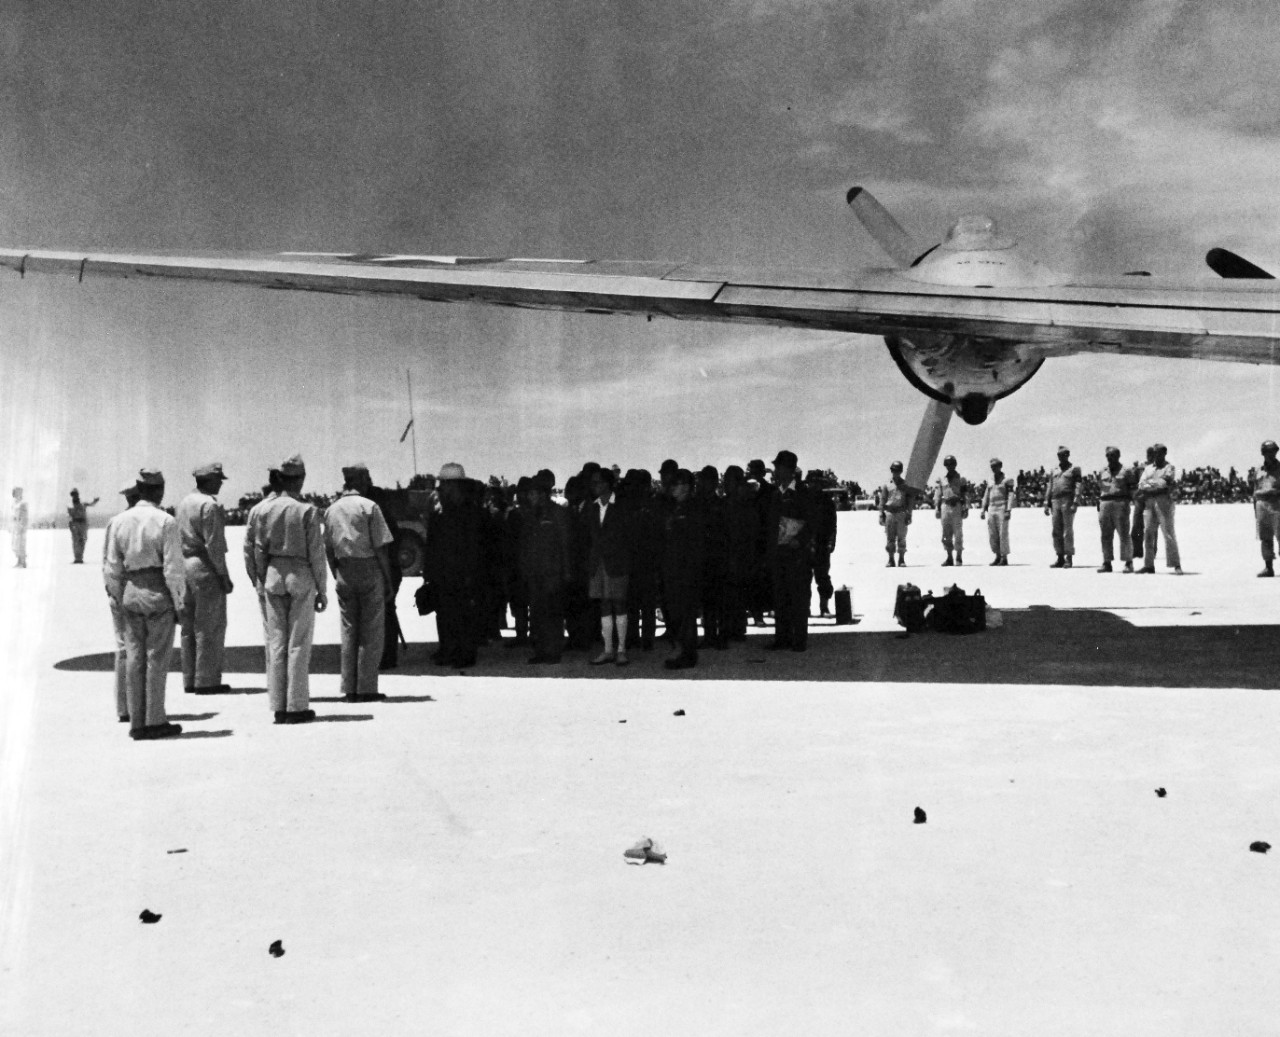 80-G-490358:  Surrender of Japan, August-September 1945.  High ranking officers of the U.S. Army face Japanese envoys to General Douglas A. MacArthur, under the wing of a giant C-54 waiting on Ie Shima to take the enemy dignitaries to Manila for conferences with the Allied Commander-in-Chief.  The Japanese landed at the island in distinctly marked planes (Red Crosses) and transferred to the transport for the last leg of their journey.  Photograph released August 19, 1945.  Official U.S. Navy Photograph, now in the collections of the National Archives.  (2015/11/10).